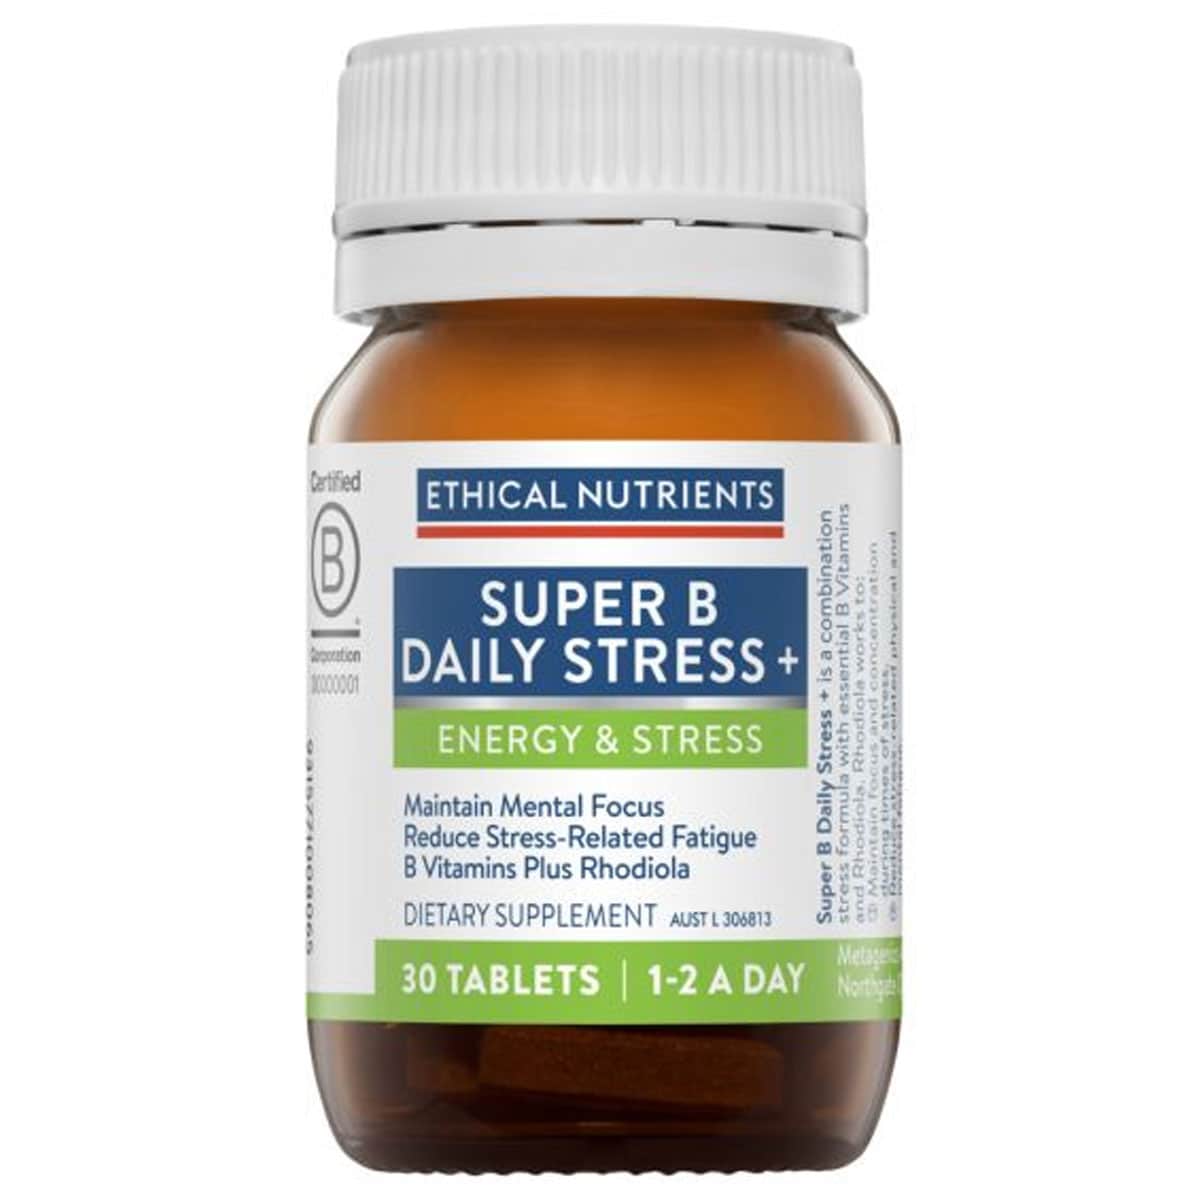 Ethical Nutrients Super B Daily Stress+ 30 Tablets